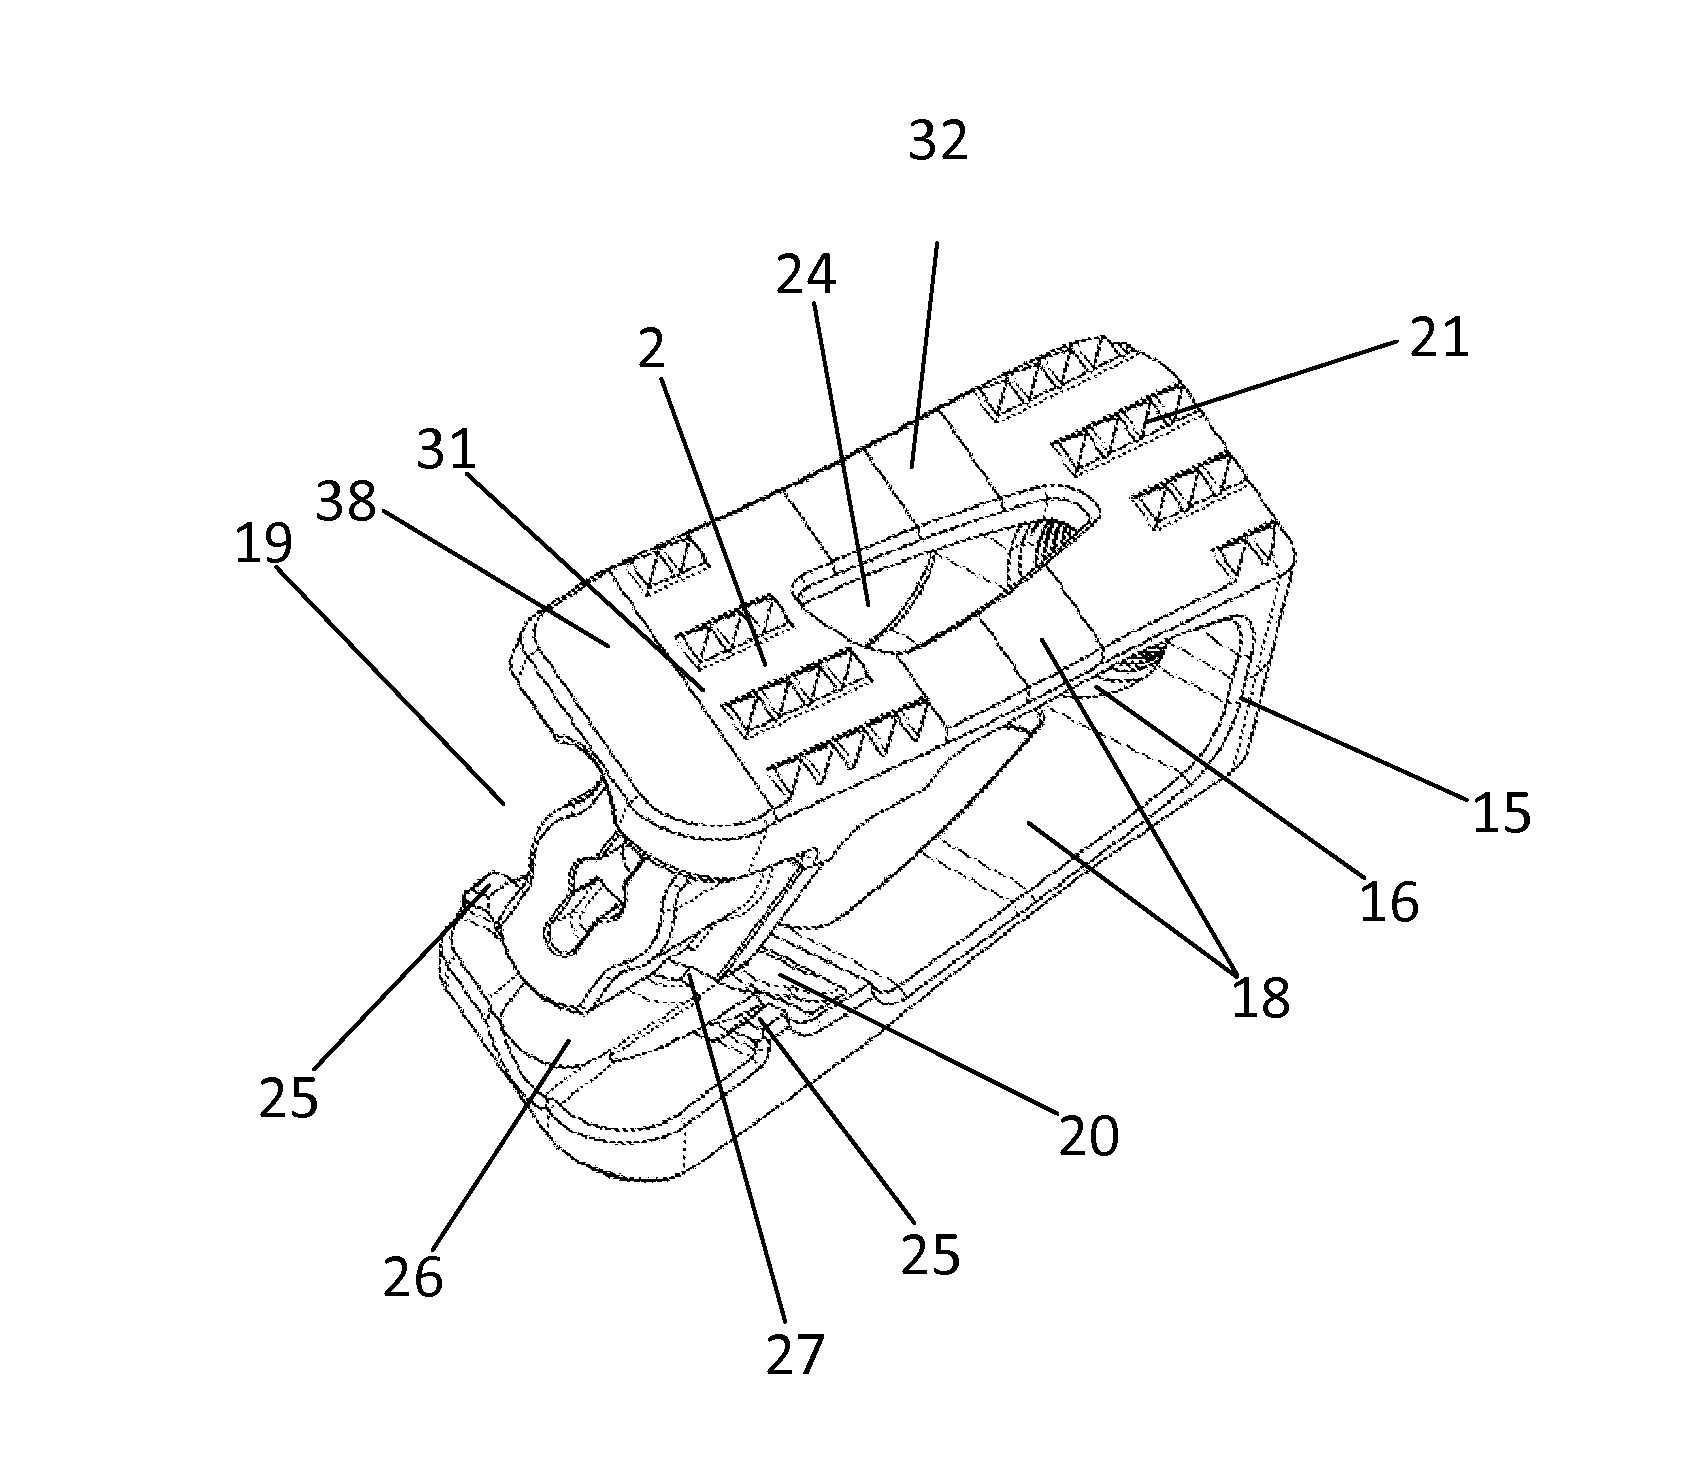 Expandable Cage for the Intercorporal Fusion of Lumbar Vertebrae